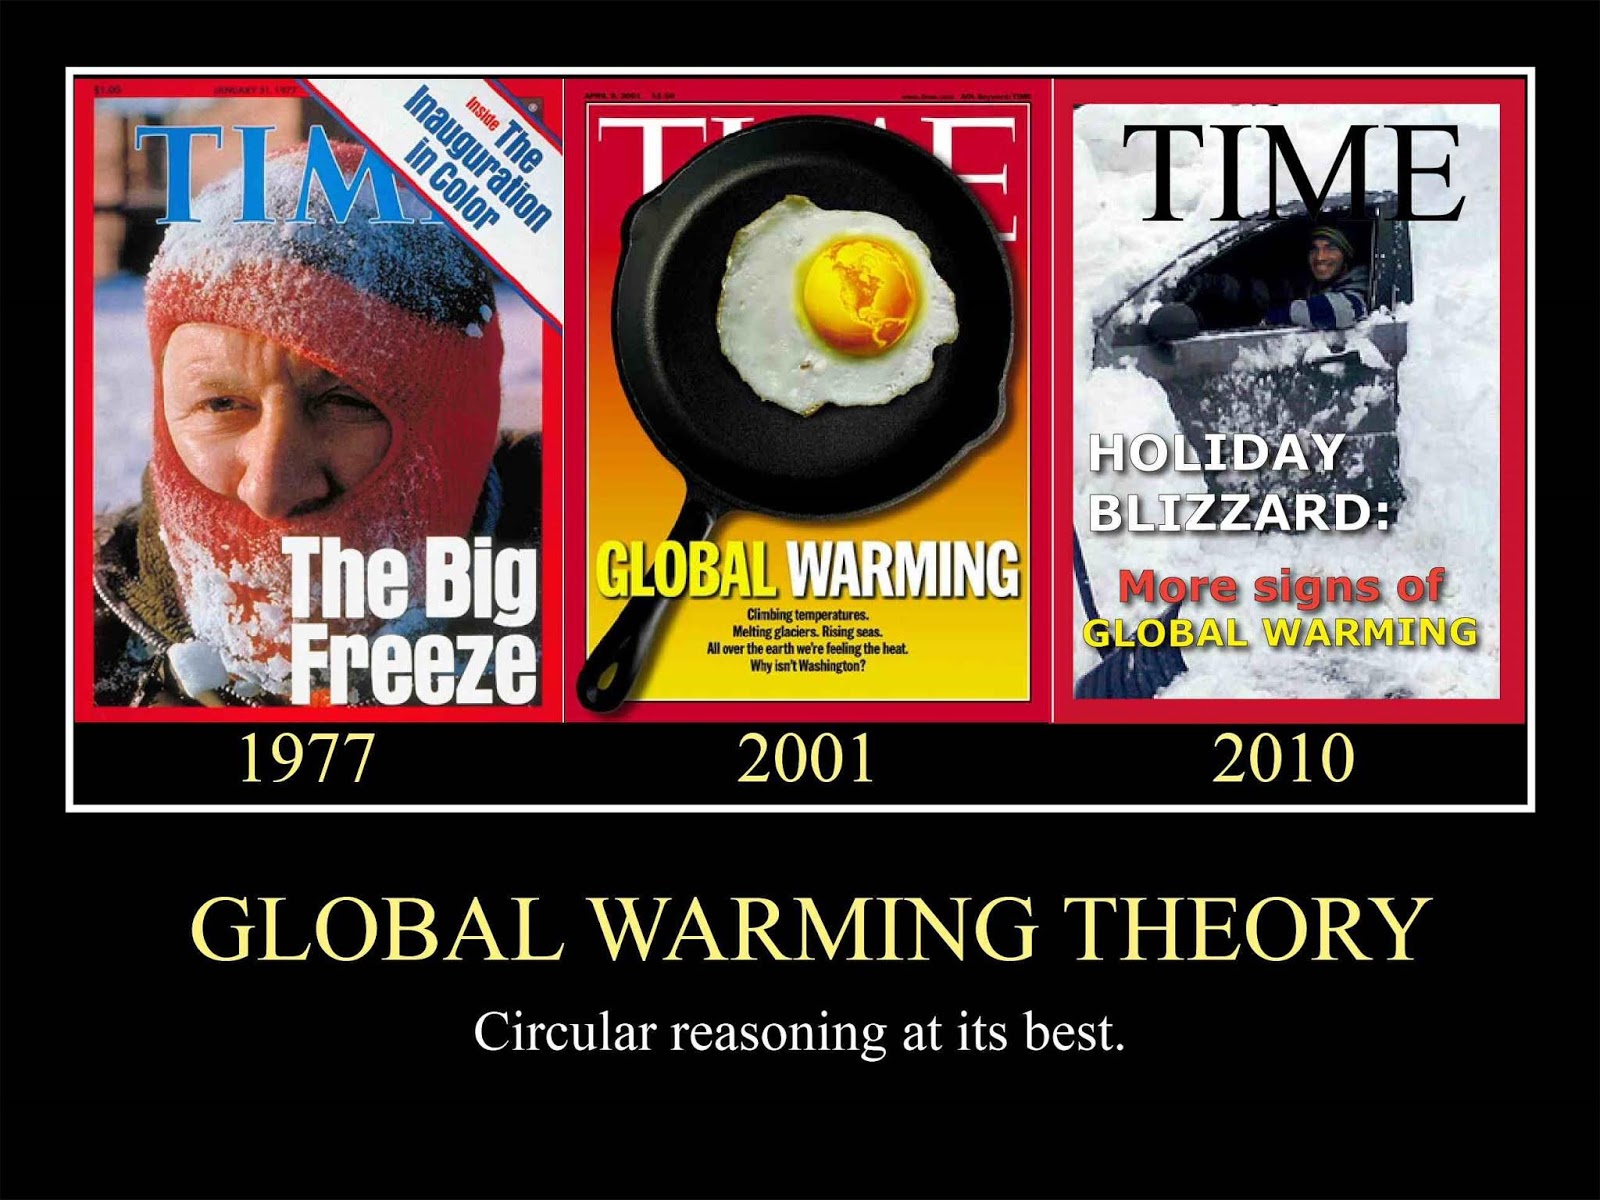 global cooling, global warming and now climate change